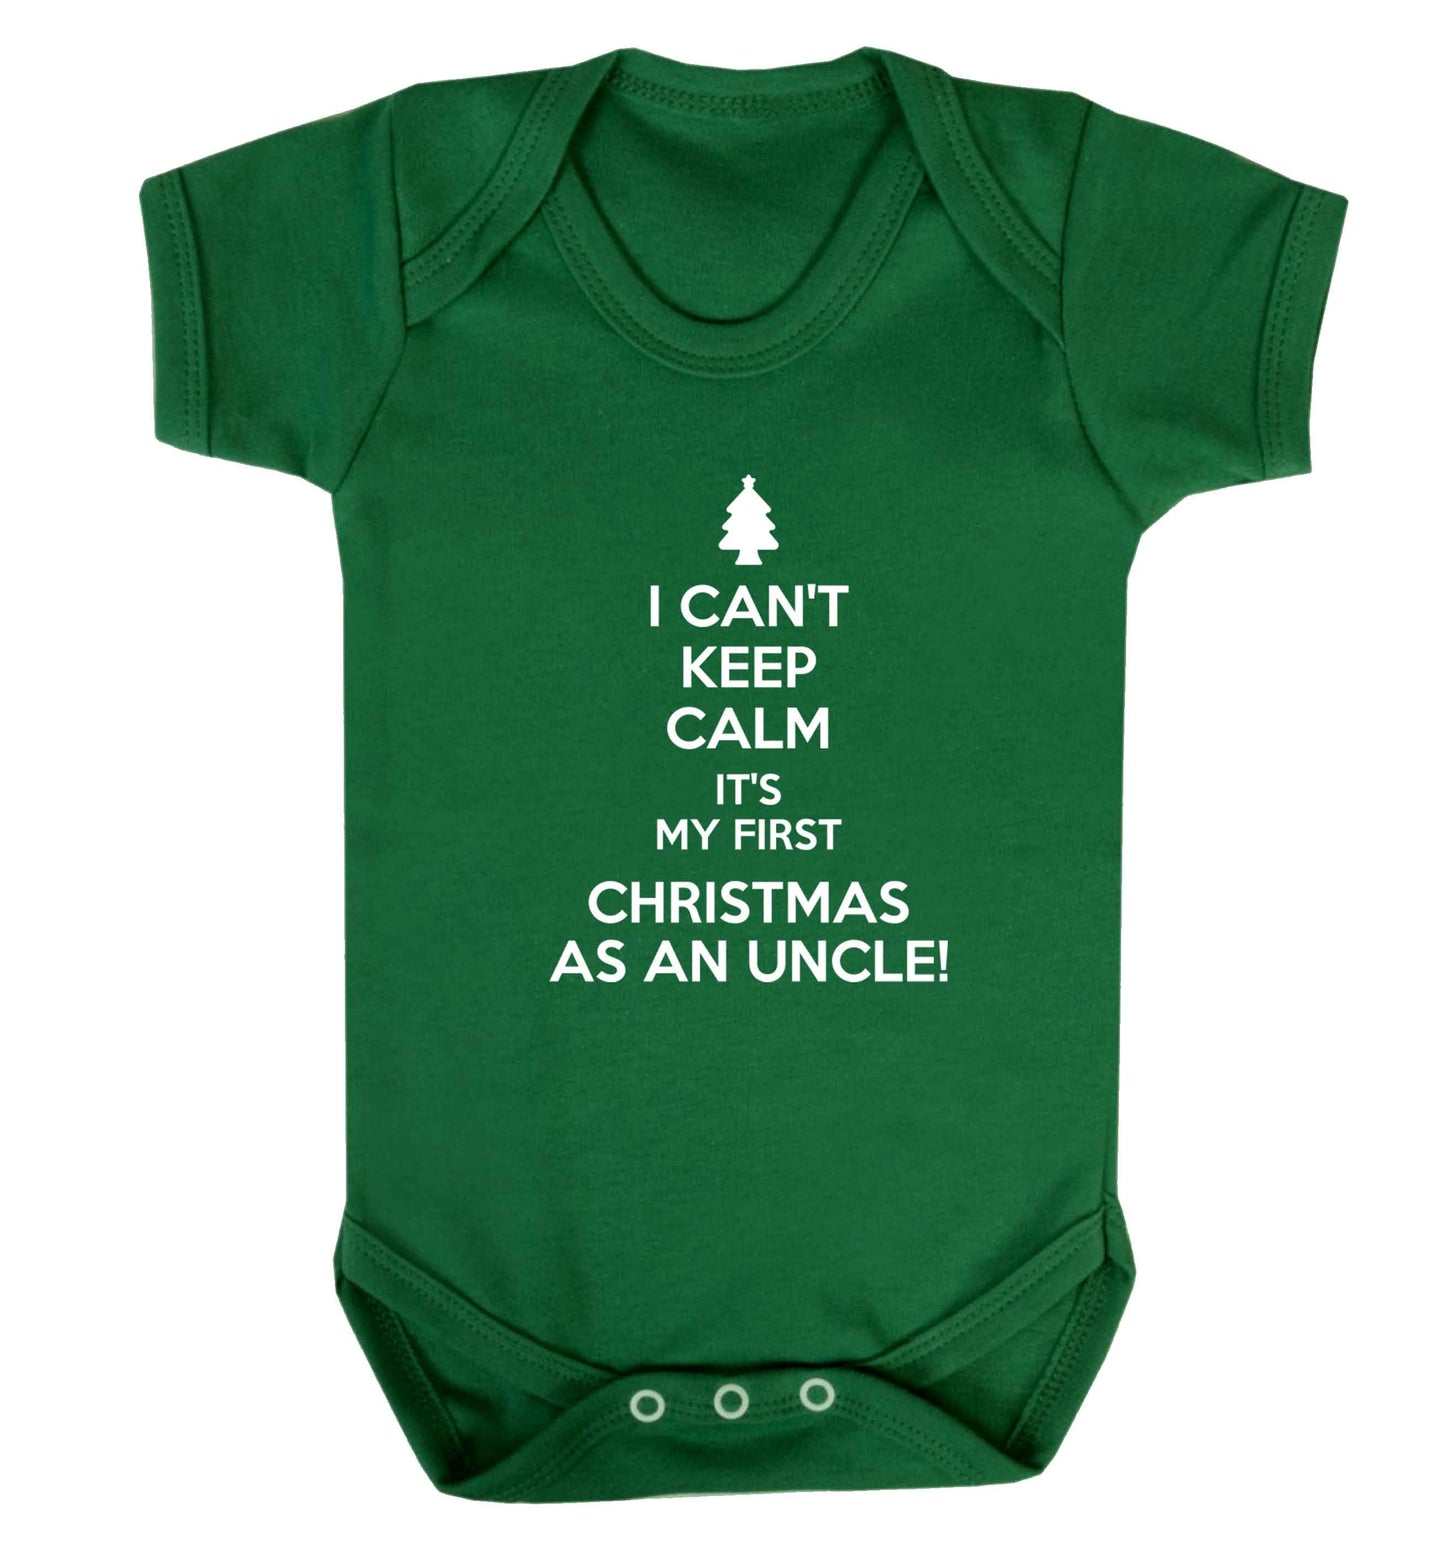 I can't keep calm it's my first Christmas as an uncle! Baby Vest green 18-24 months